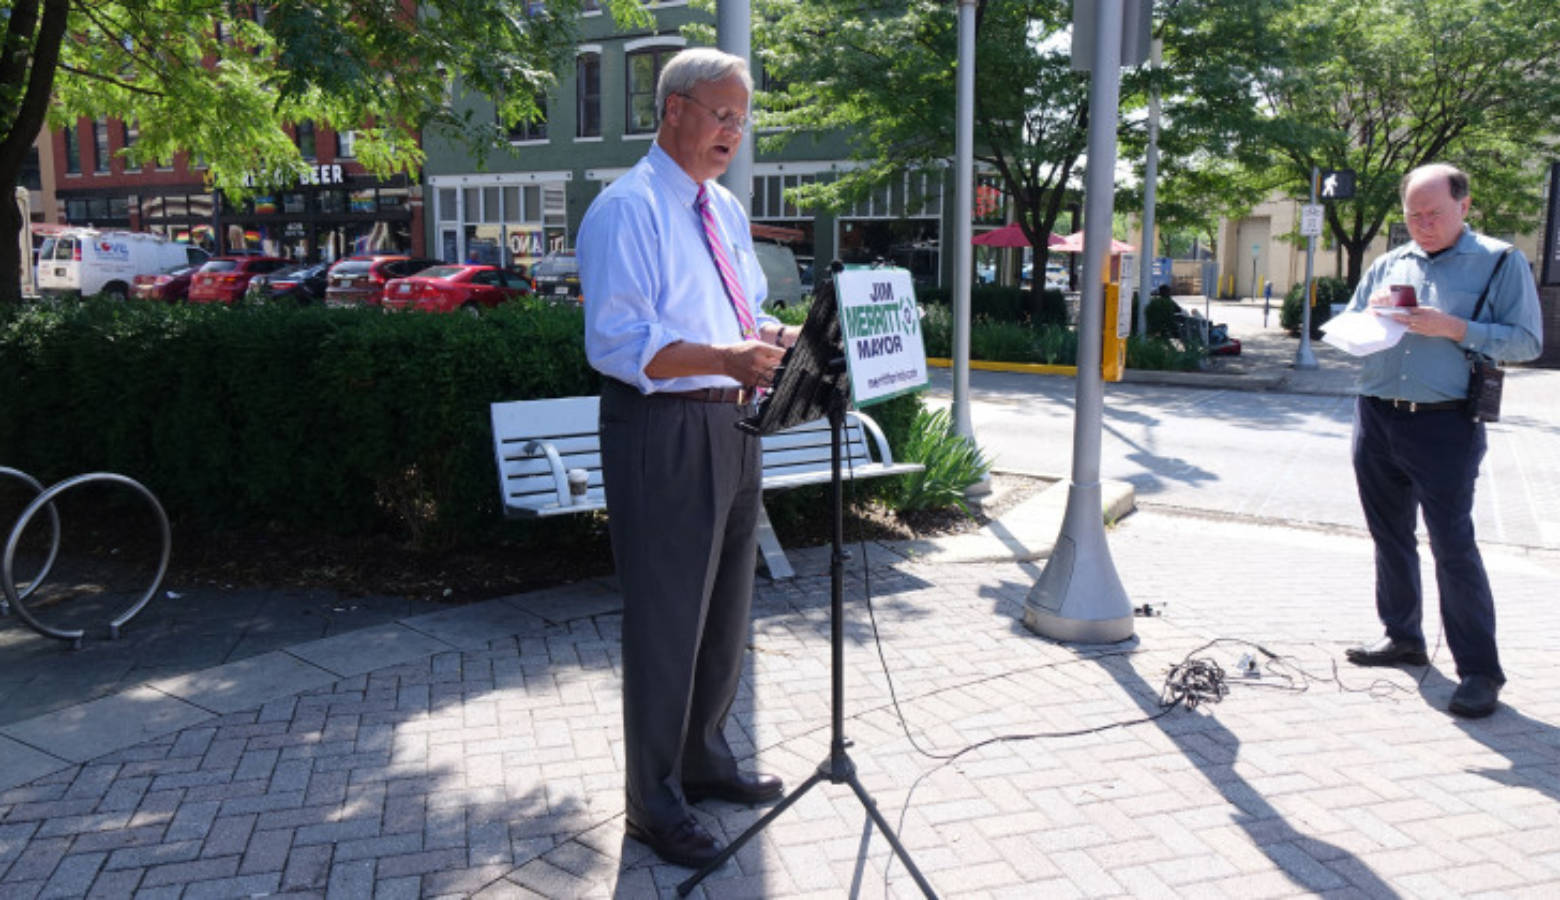 Republican mayoral candidate Jim Merritt says he will not march at Indianapolis's Pride Parade after organizers said he's not welcome, though he's not banned.